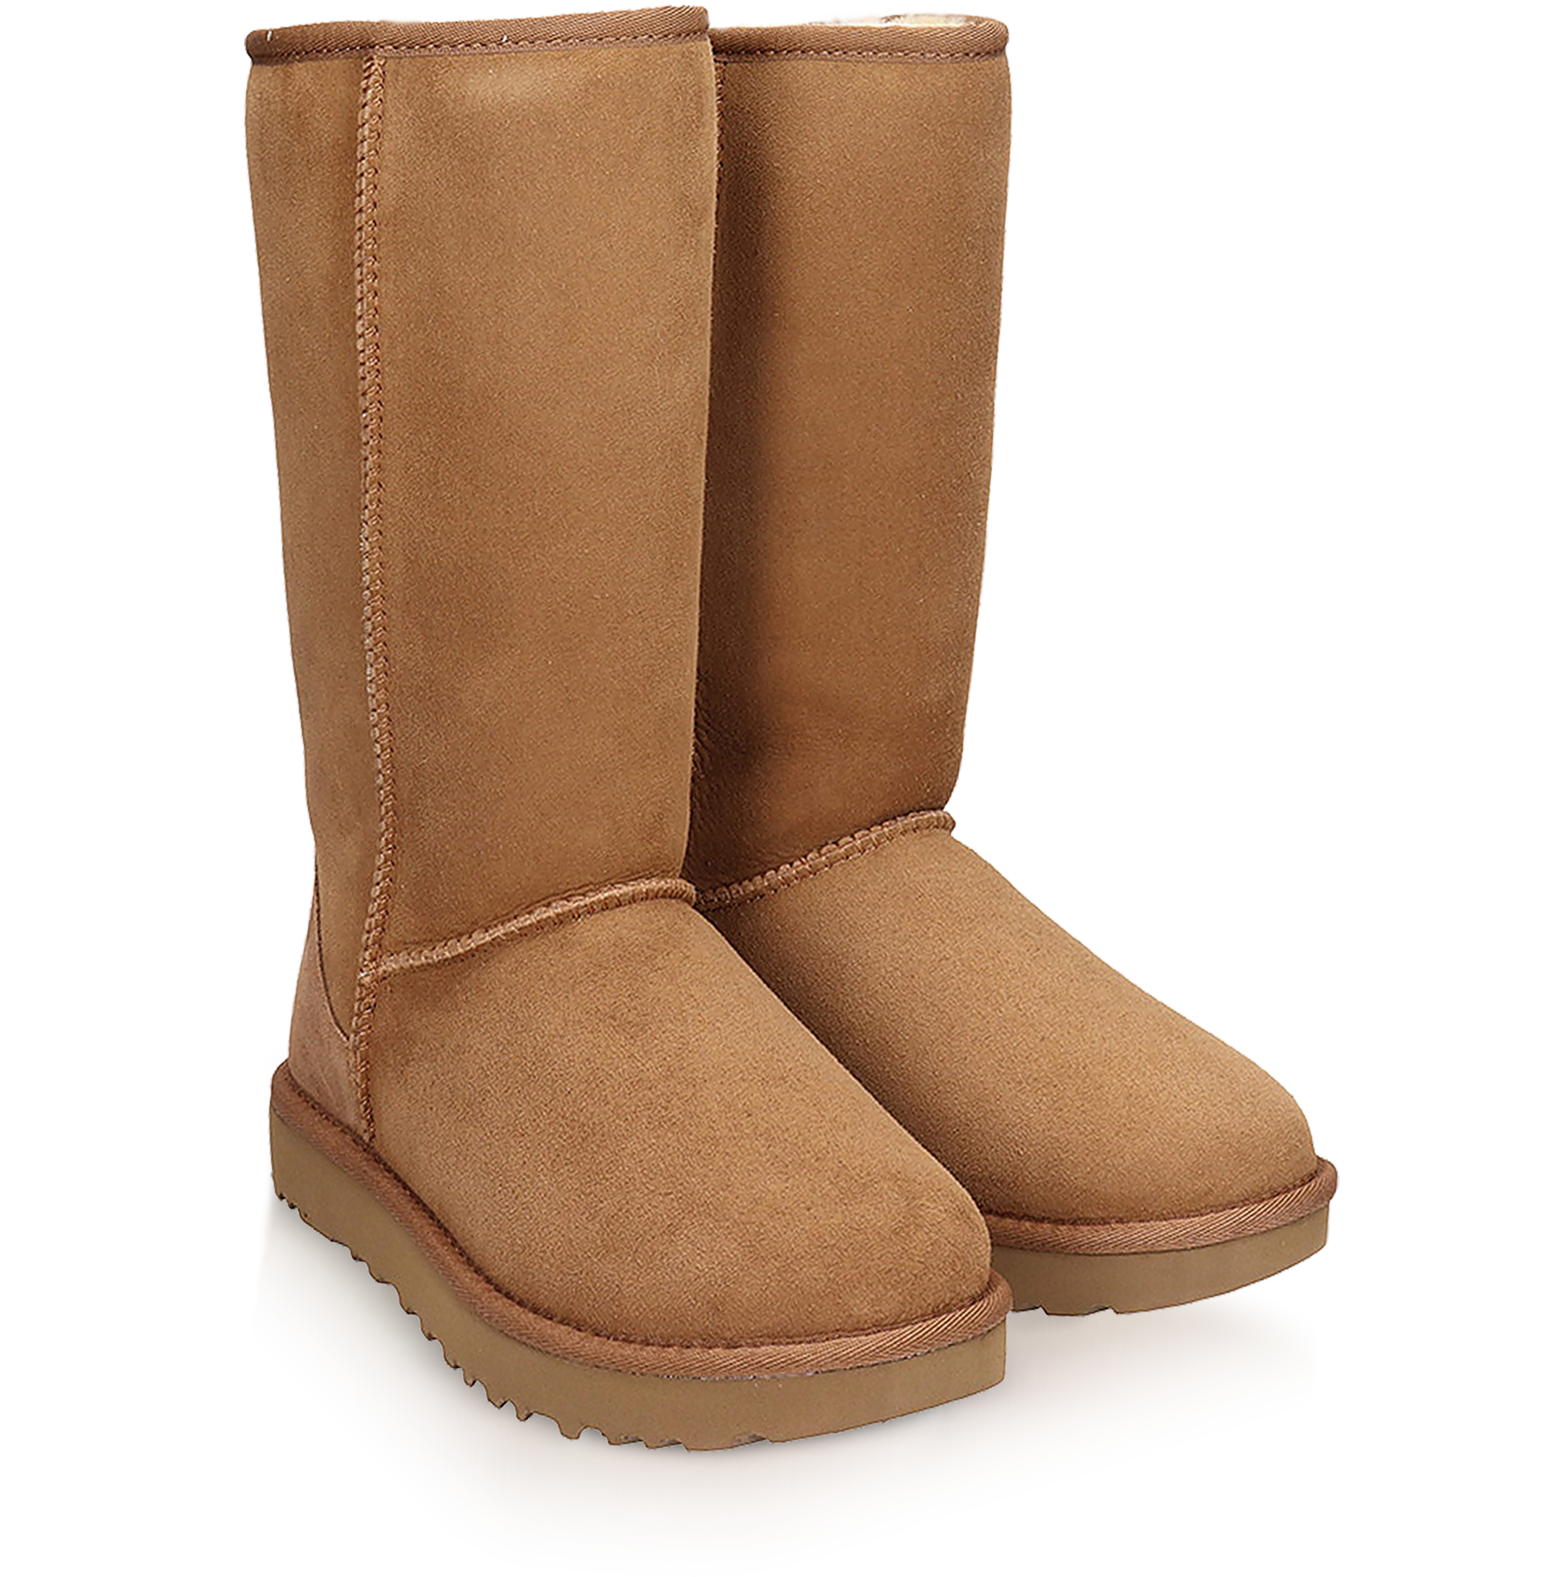 UGG Classic Tall Chestnut Boots 5 US 